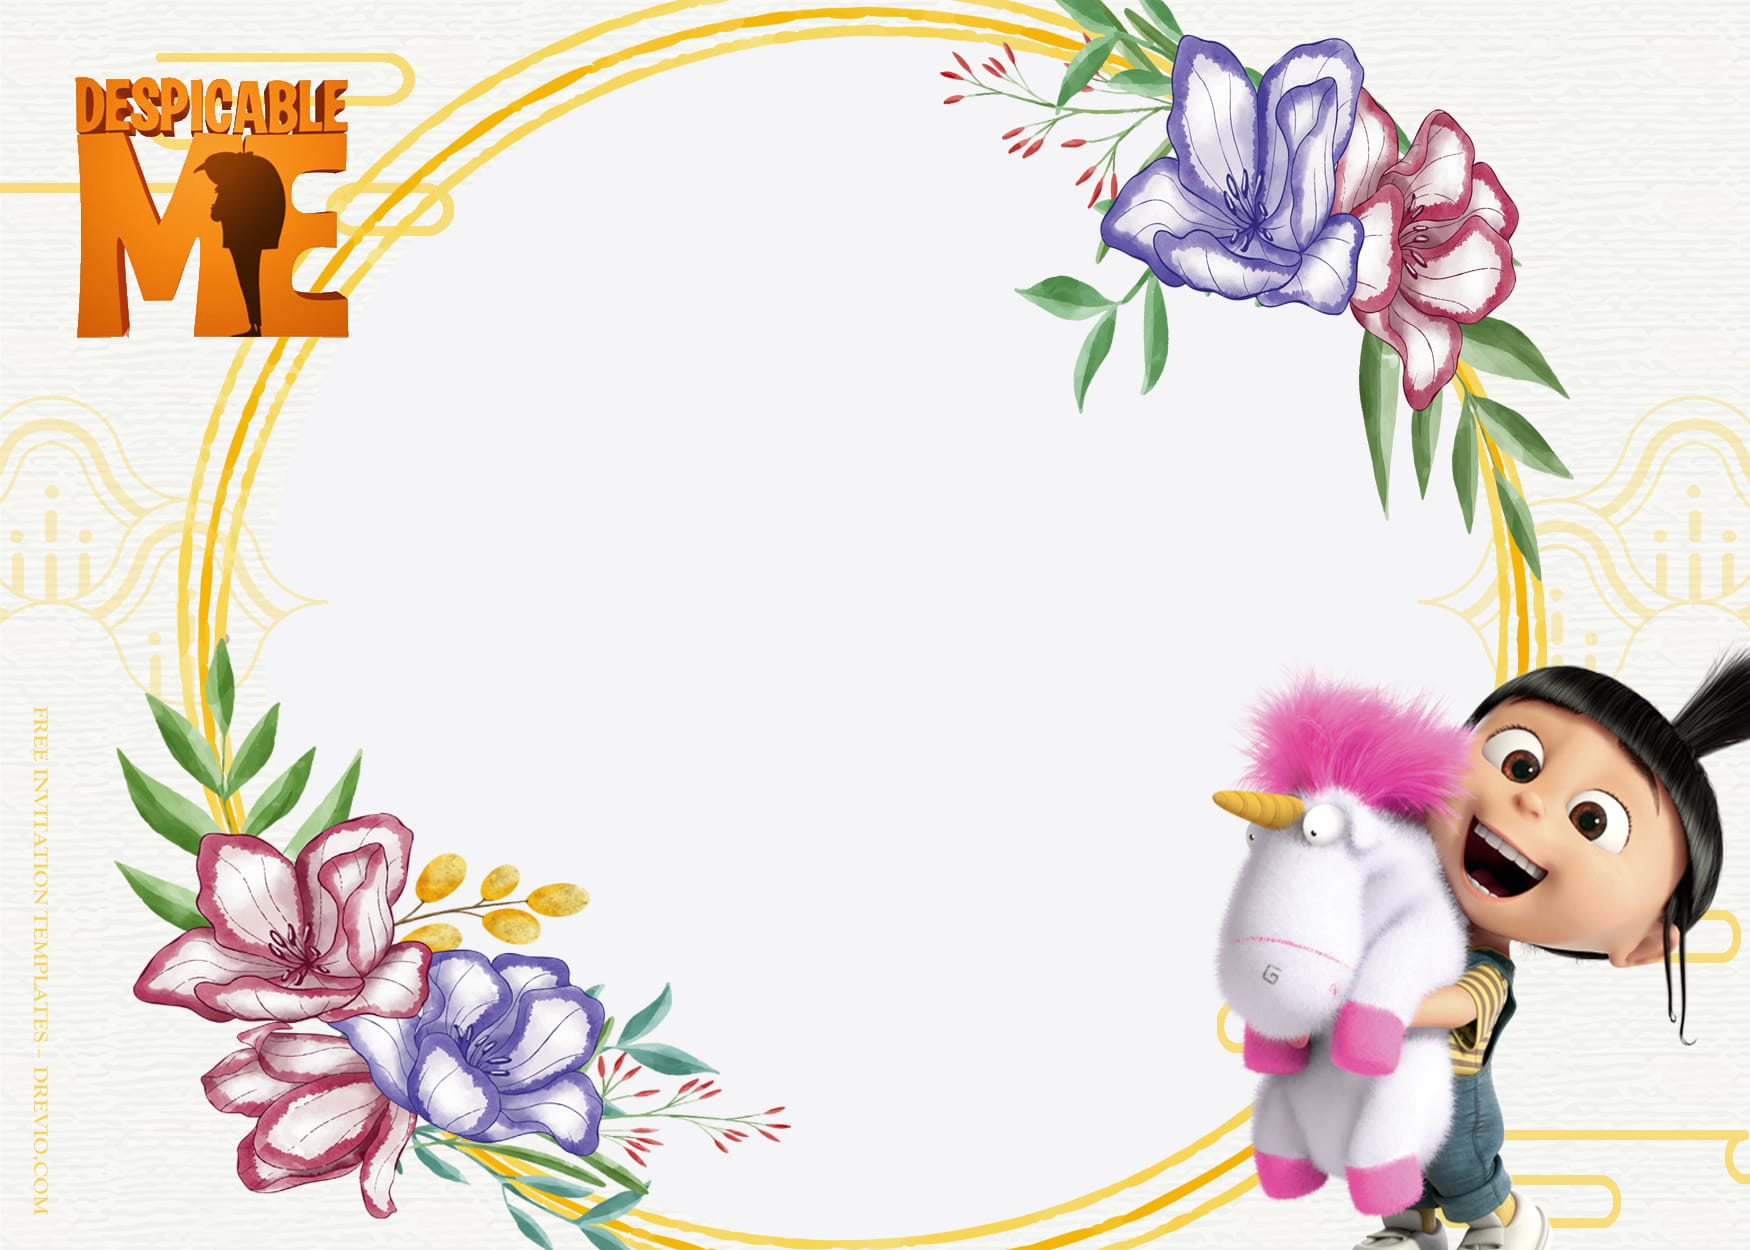 8+ Despicable Me Trip To Blossom Birthday Invitation Templates Type Two